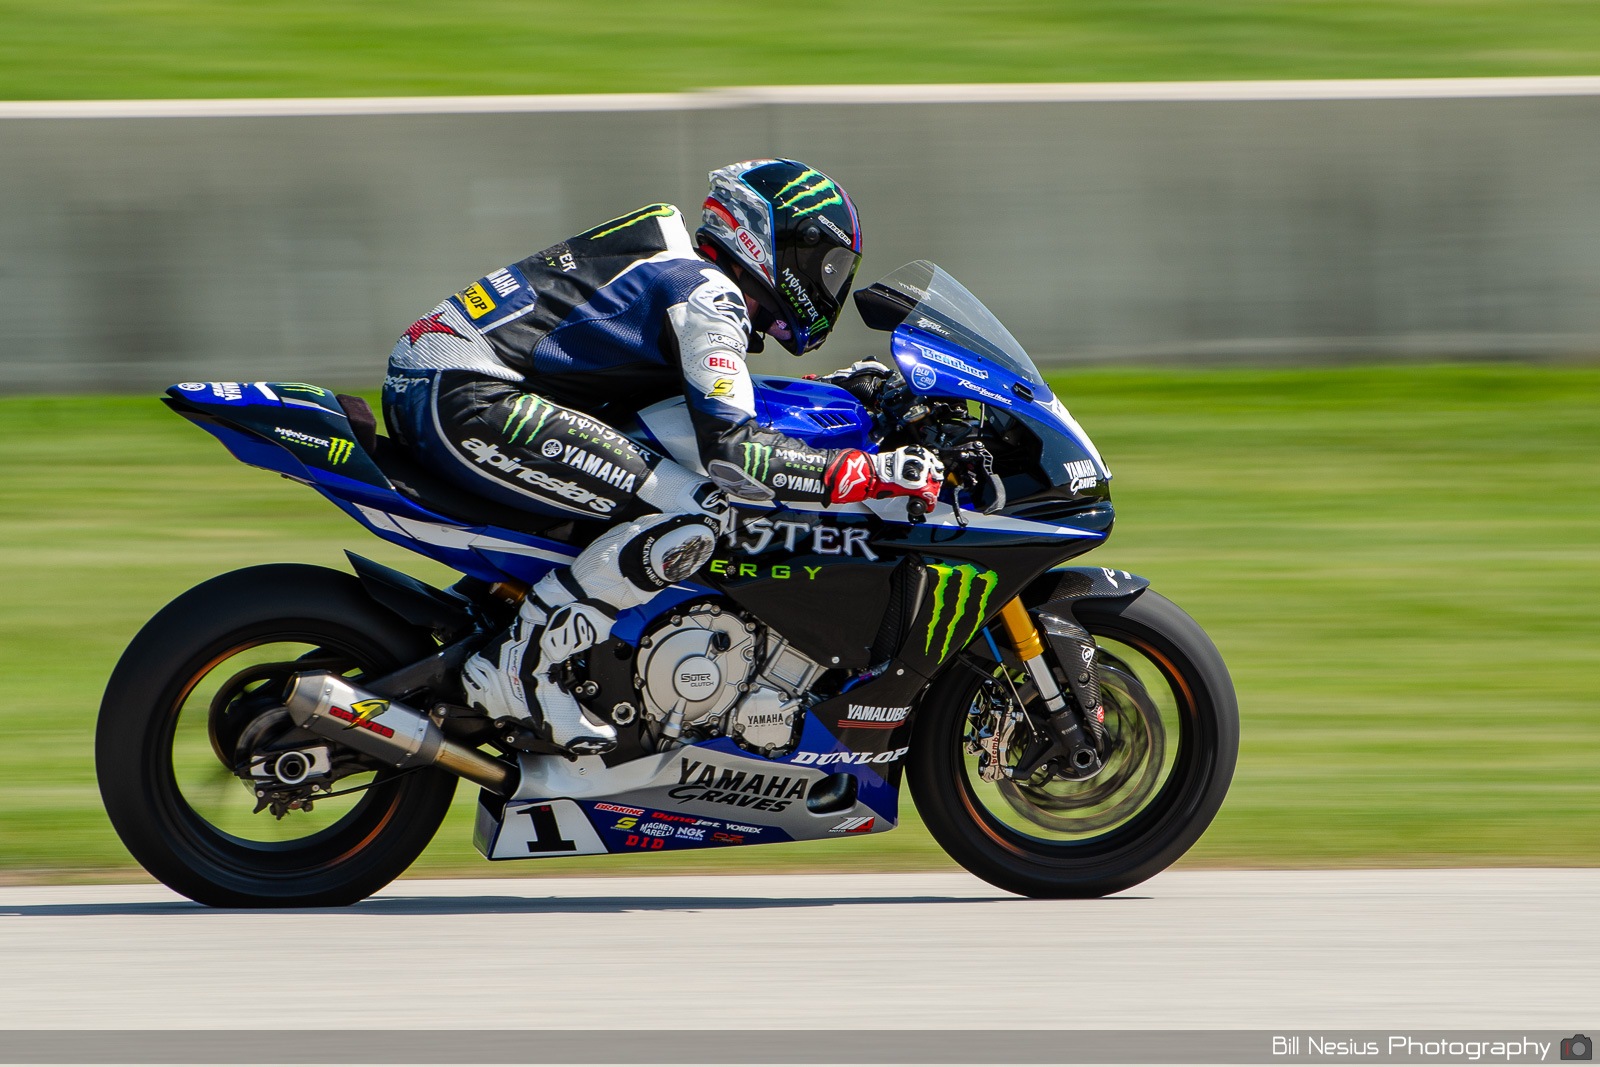 Cameron Beaubier on the Number 1 Monster Energy Graves Yamaha R1 / DSC_5776 / 4